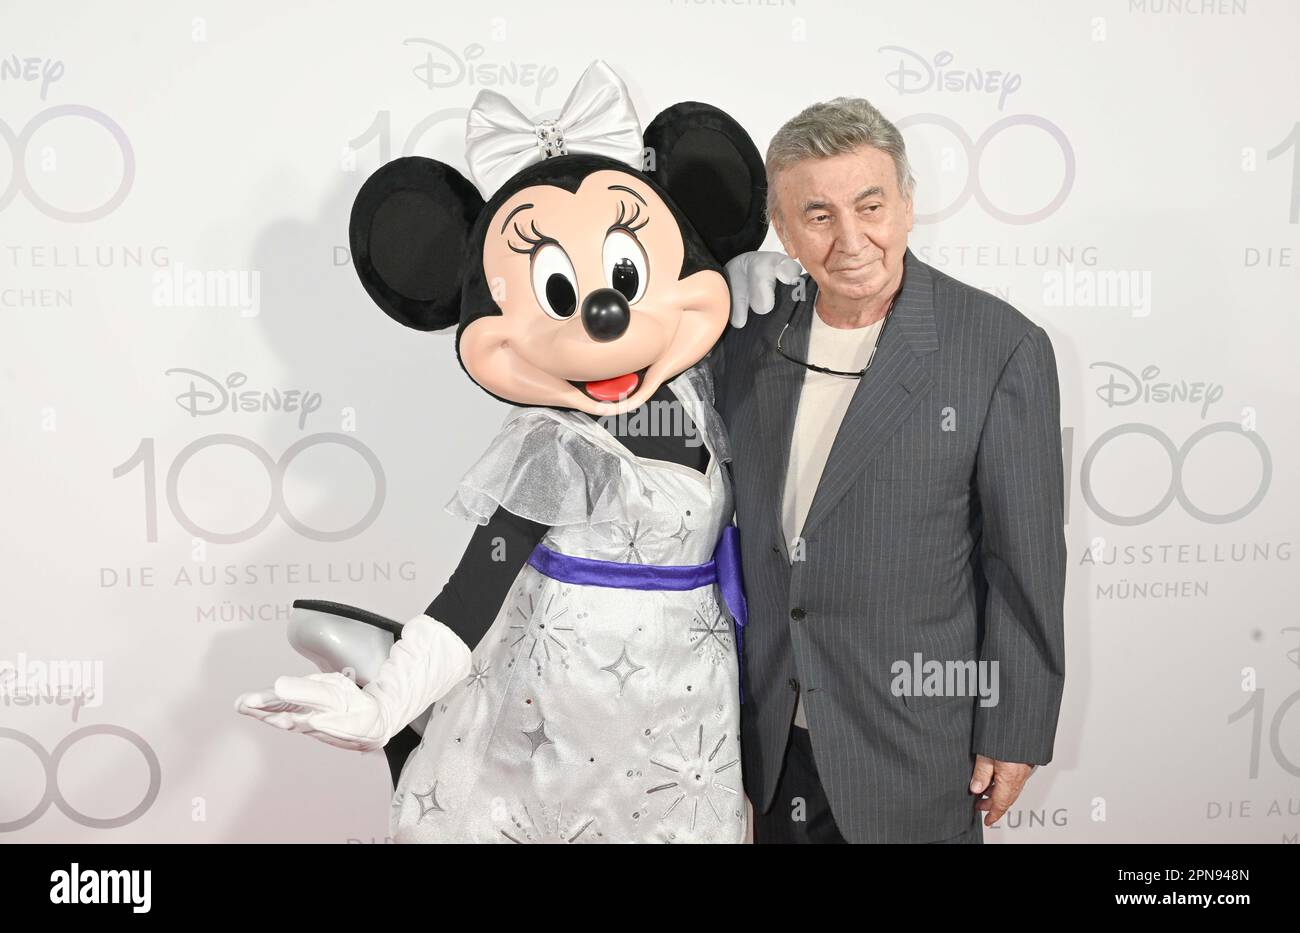 Munich, Germany. 17th Apr, 2023. Marcel Avram, concert and tour promoter presents himself at the Red Carpet of the exhibition 'Disney 100' in the Small Olympic Hall. The show provides insights into the history and works of the Walt Disney Company. Credit: Afelix Hörhager/dpa/Alamy Live News Stock Photo